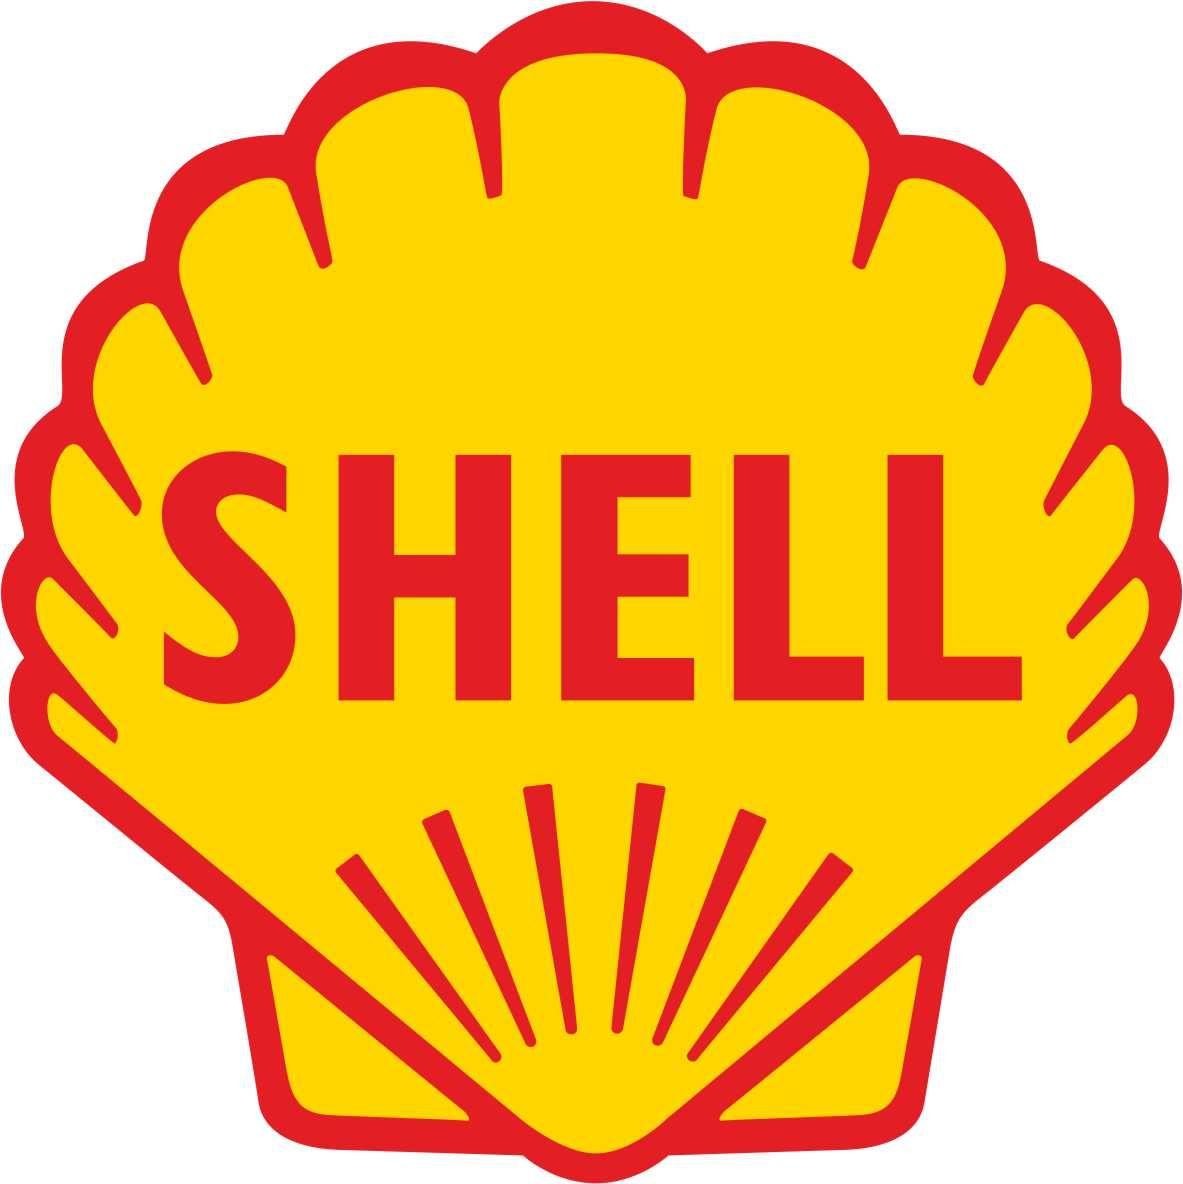 Old Oil Company Logo - Oil Company Logos | Shell Oil Old Logo | Vintage graphics & things